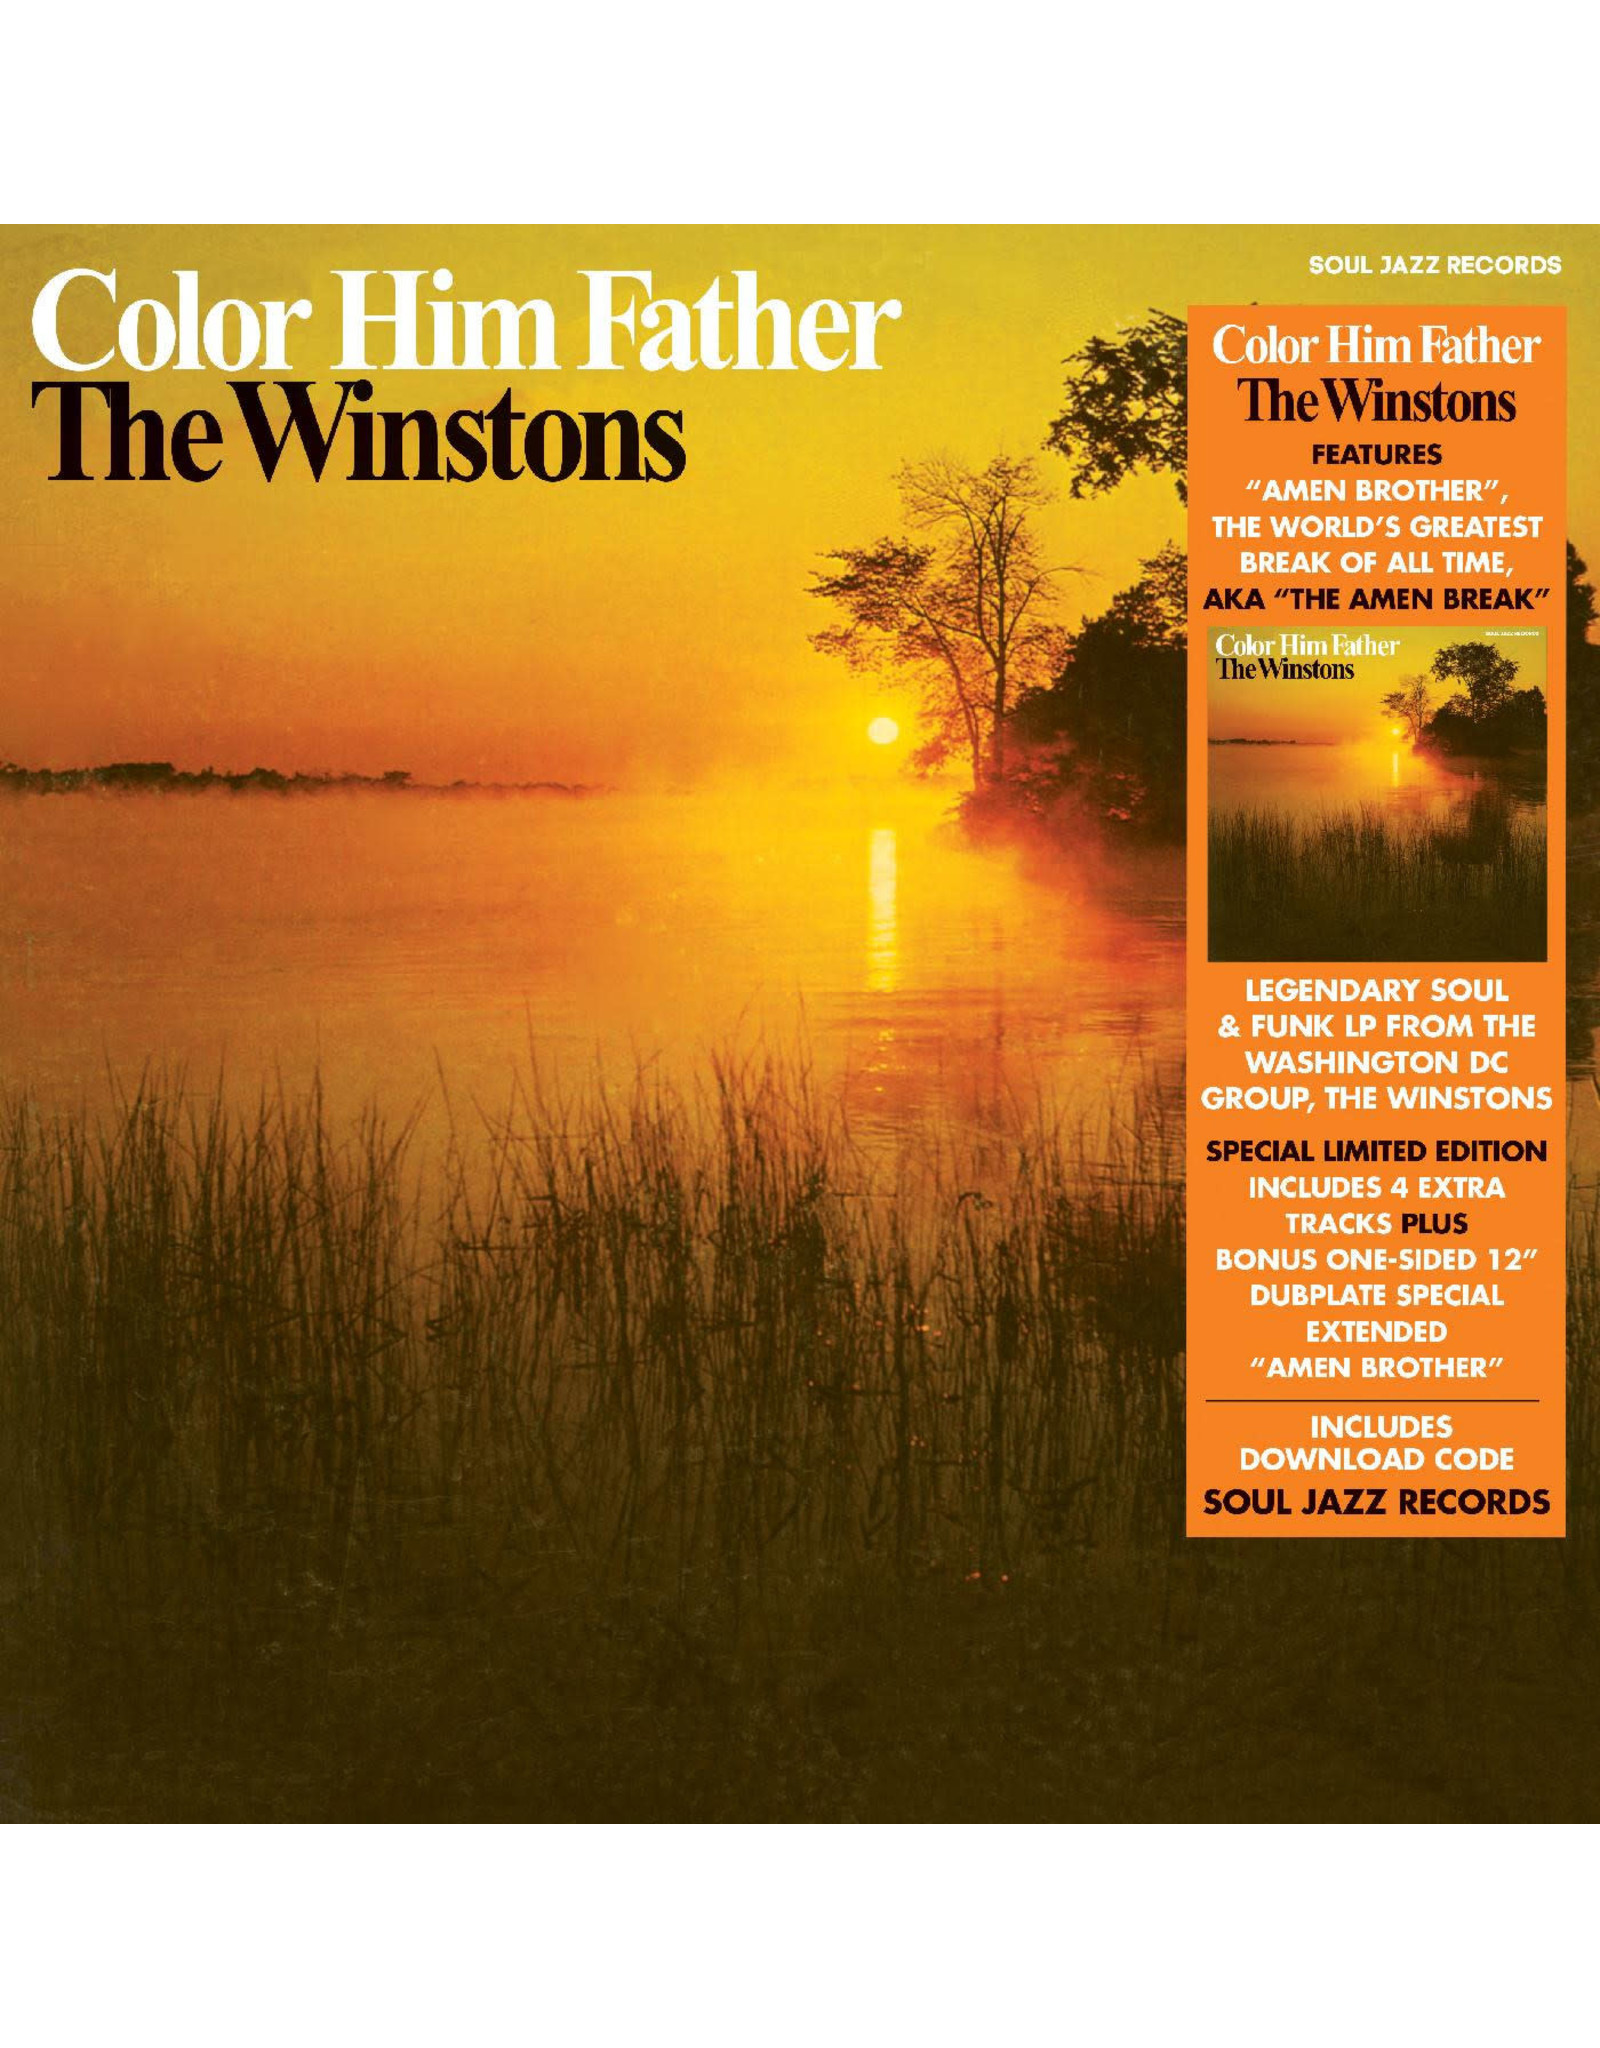 New Vinyl The Winstons - Color Him Father LP